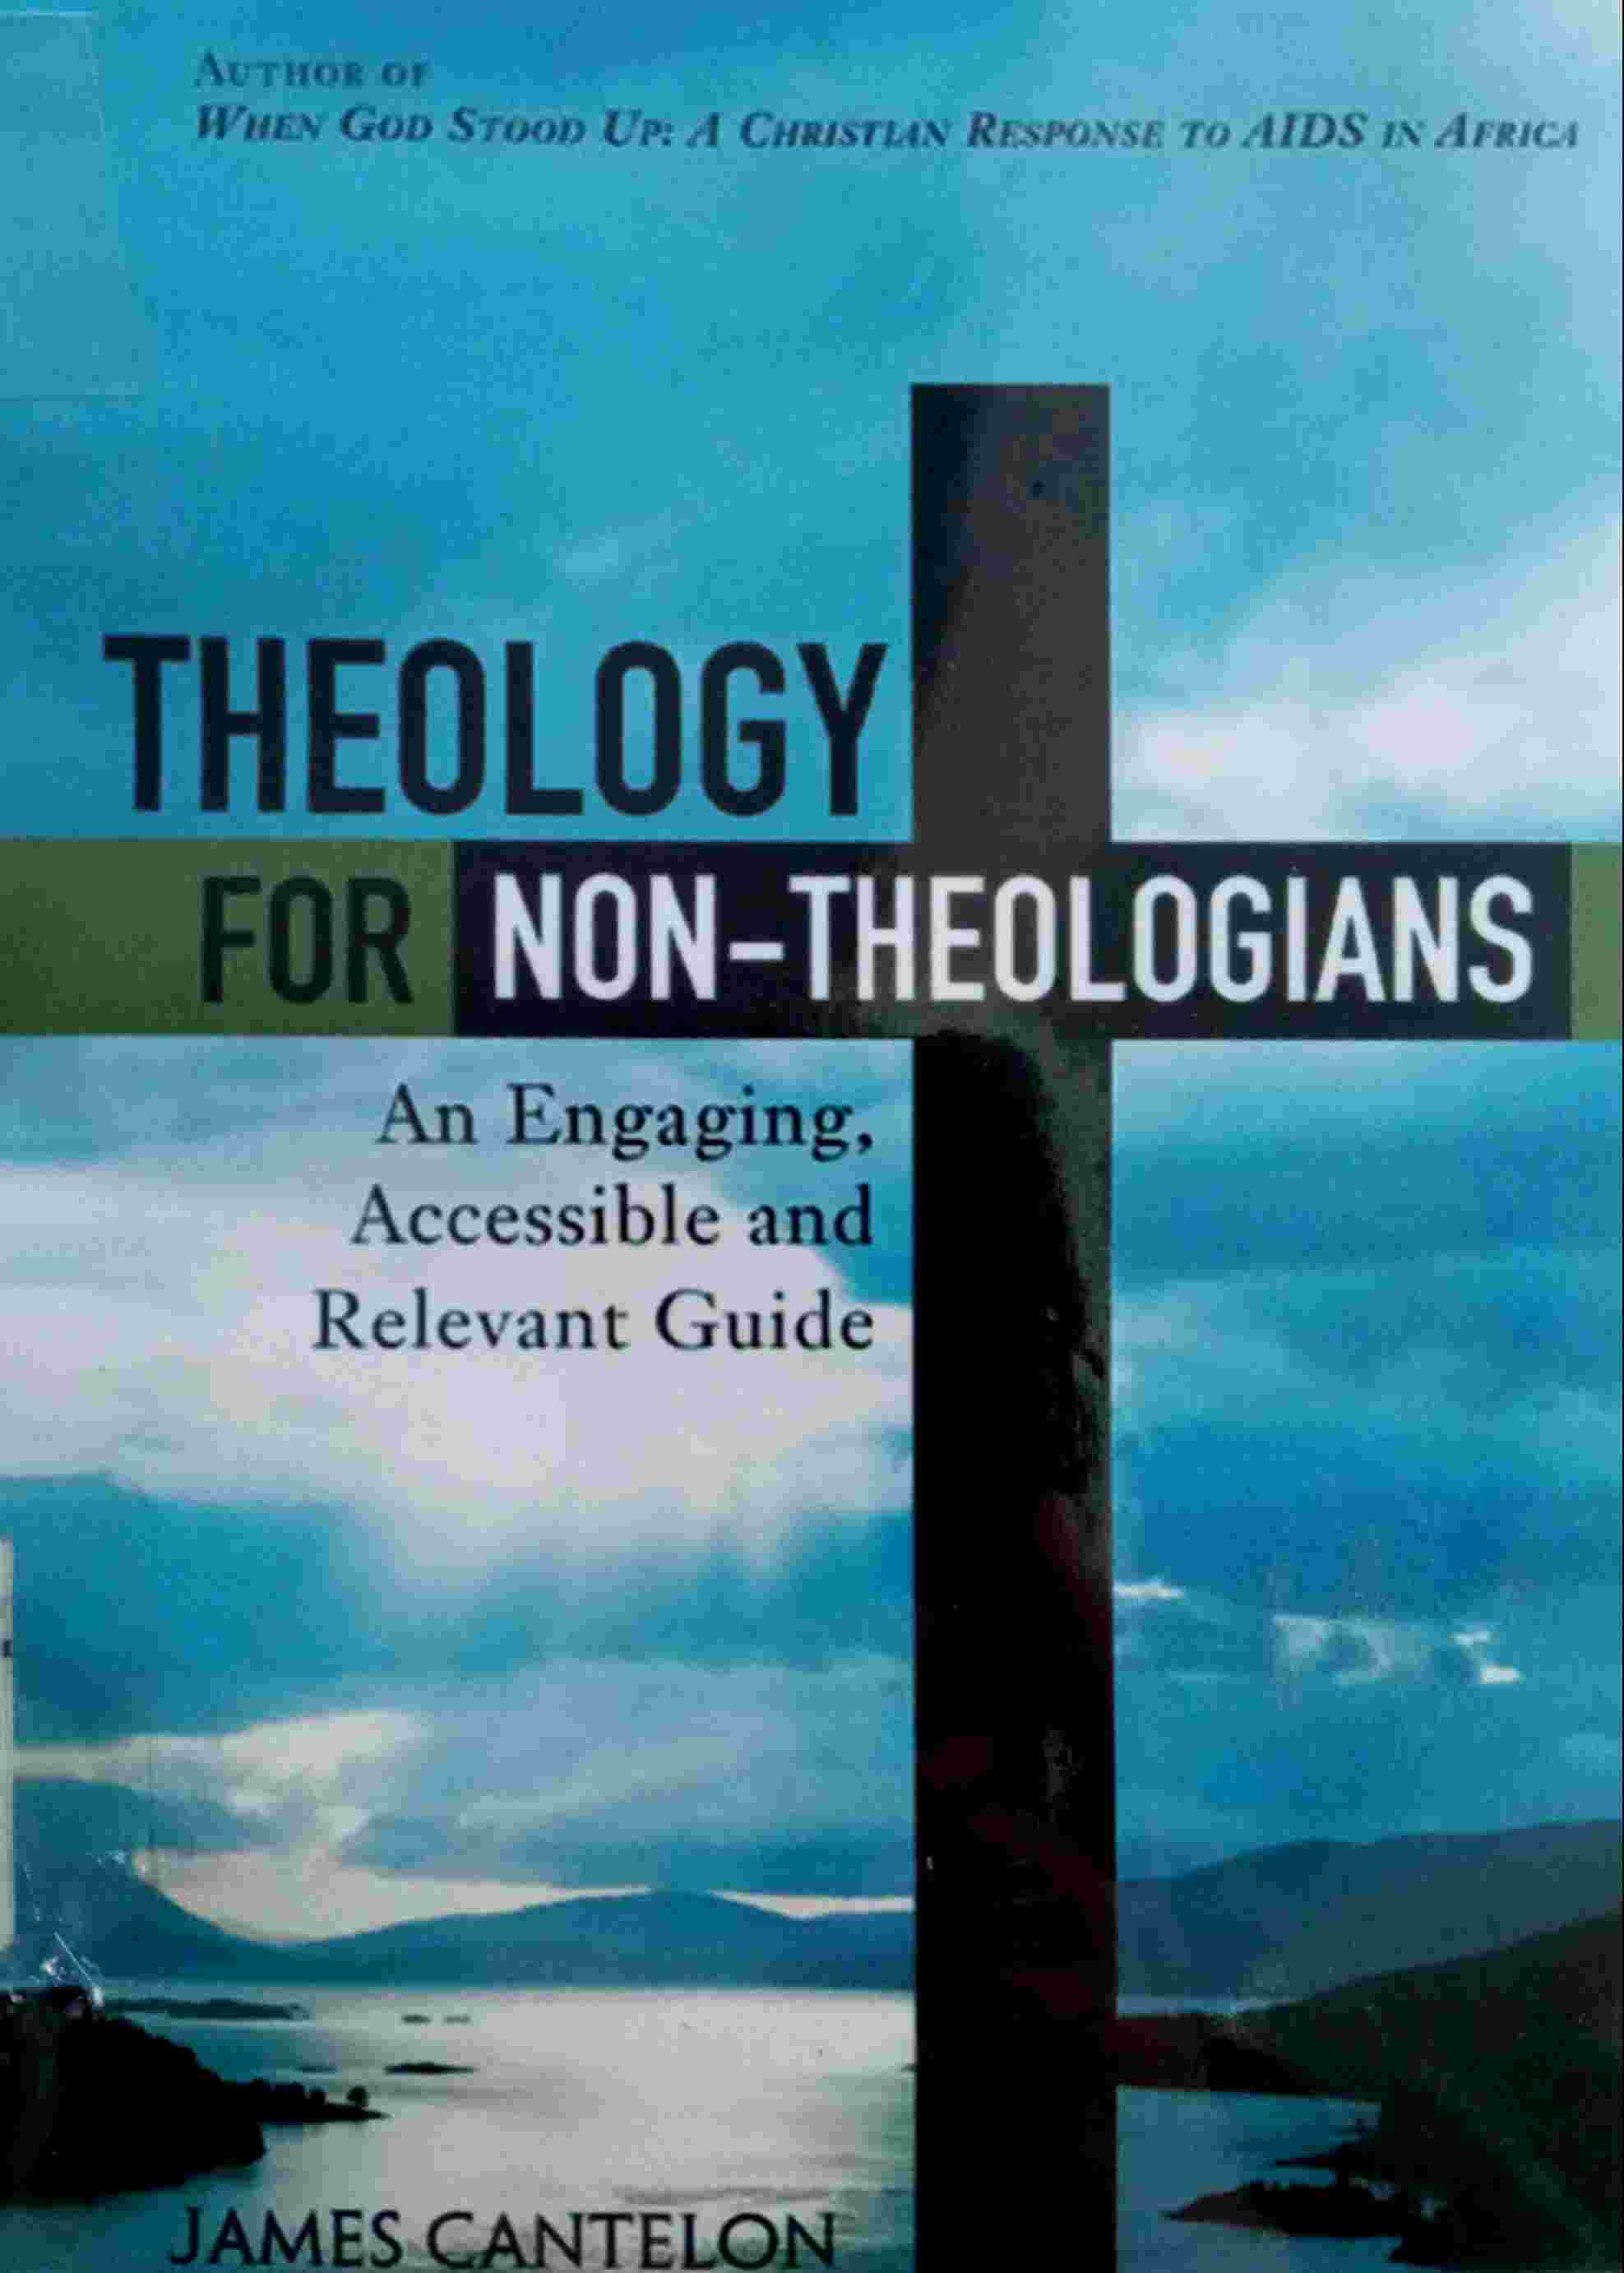 THEOLOGY FOR NON-THEOLOGIANS